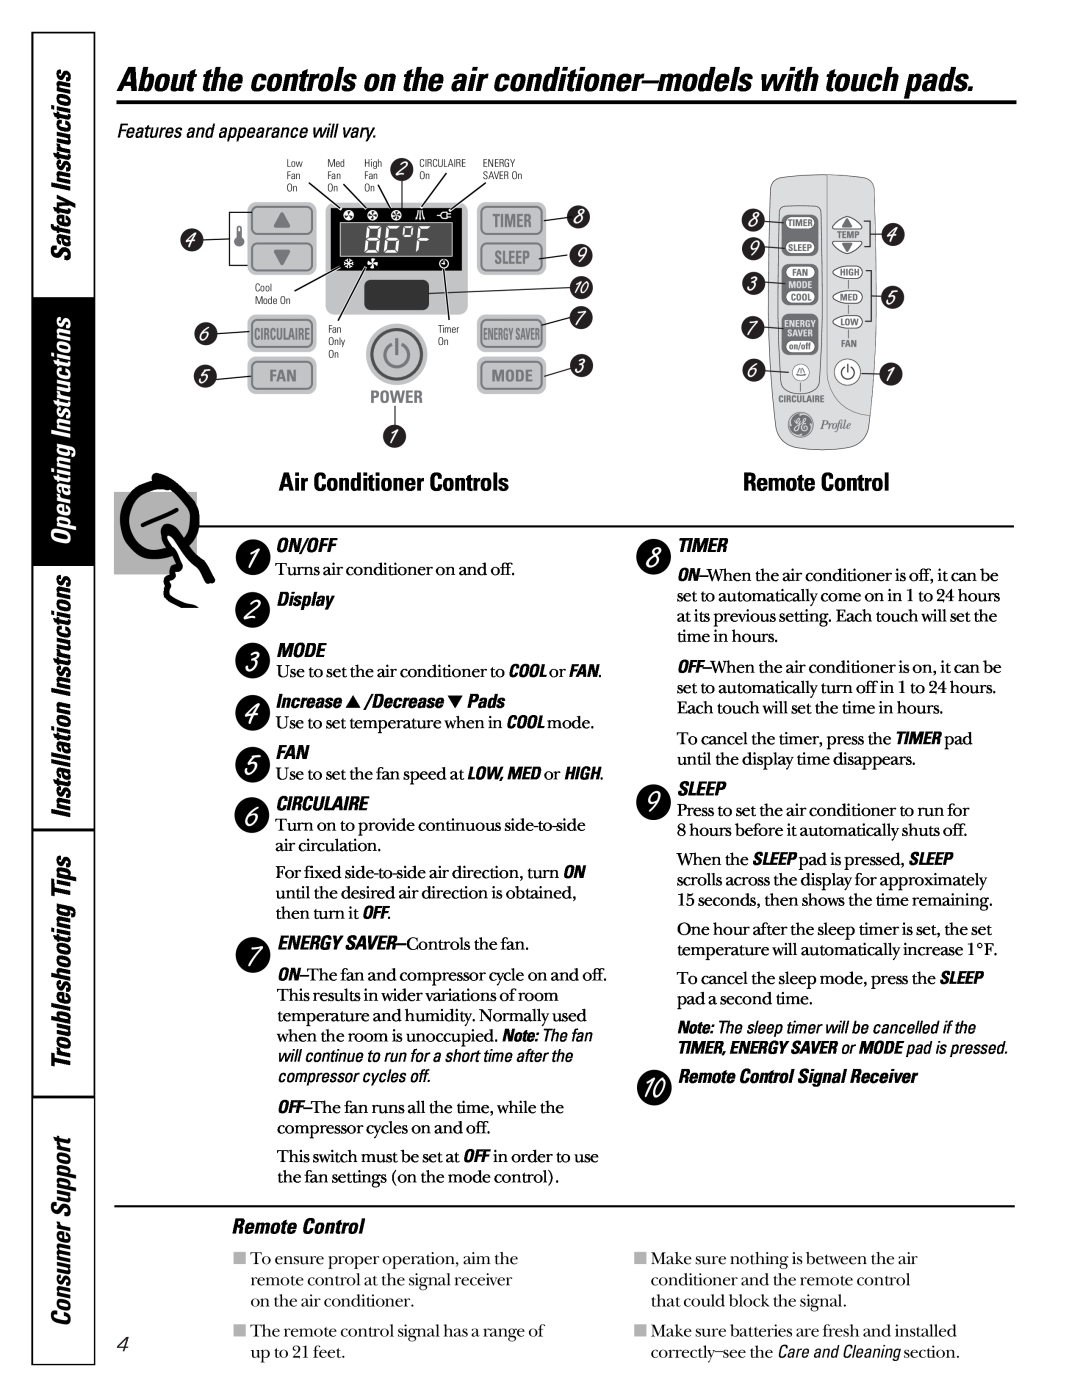 GE ASD06 Operating Instructions Safety Instructions, Consumer, Remote Control, On/Off, Display MODE, Circulaire, Timer 